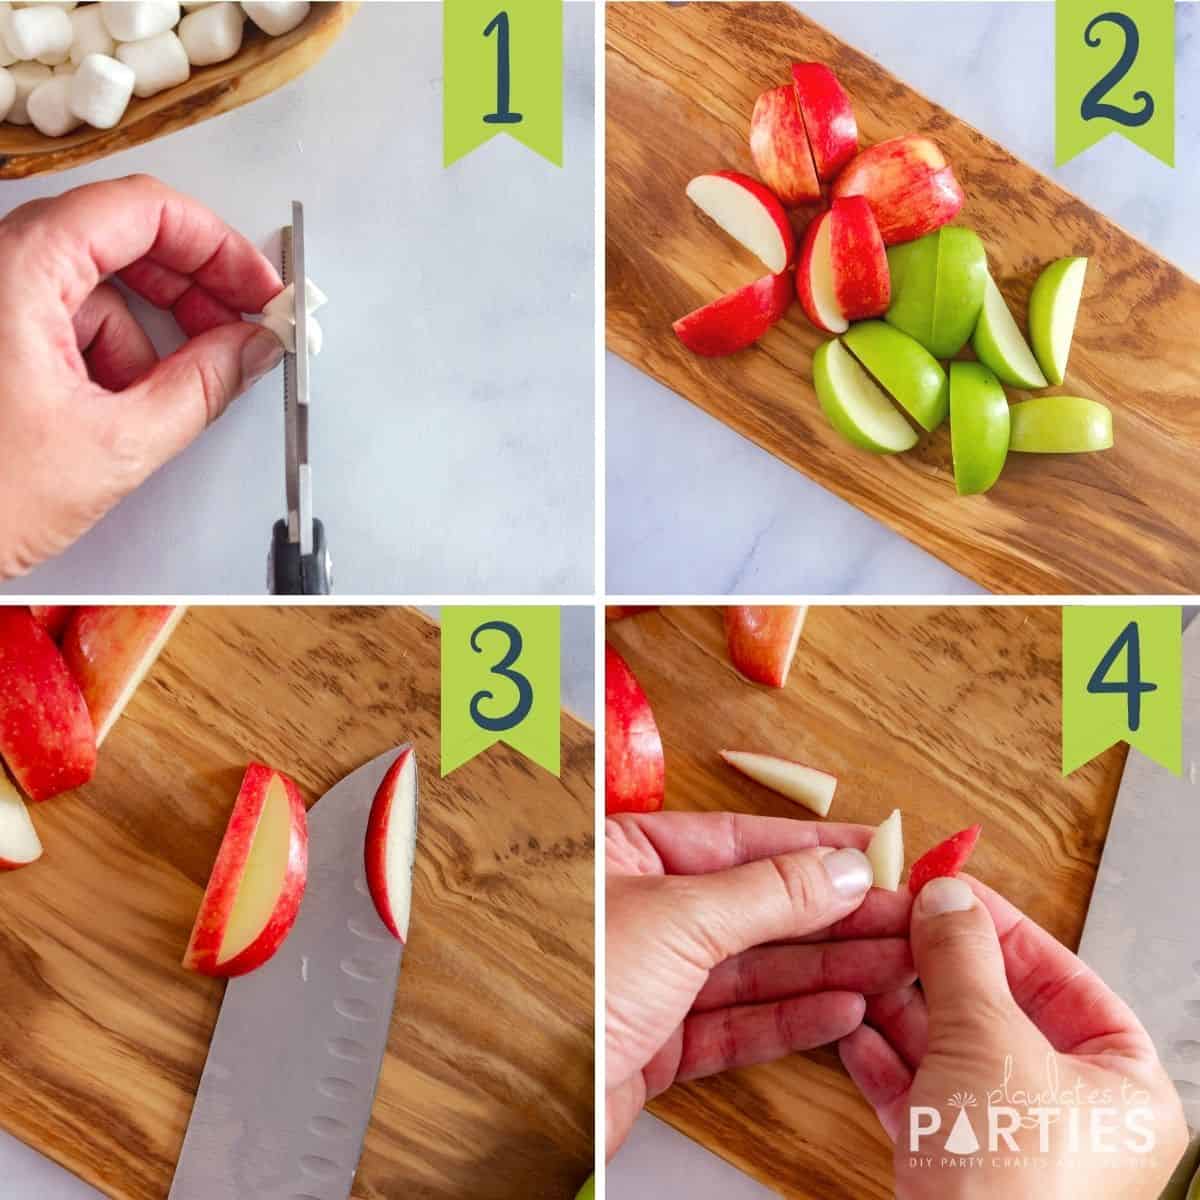 steps 1-4 for making monster apple teeth: preparing the marshmallows, slicing the apples, and cutting the mouth out of each wedge